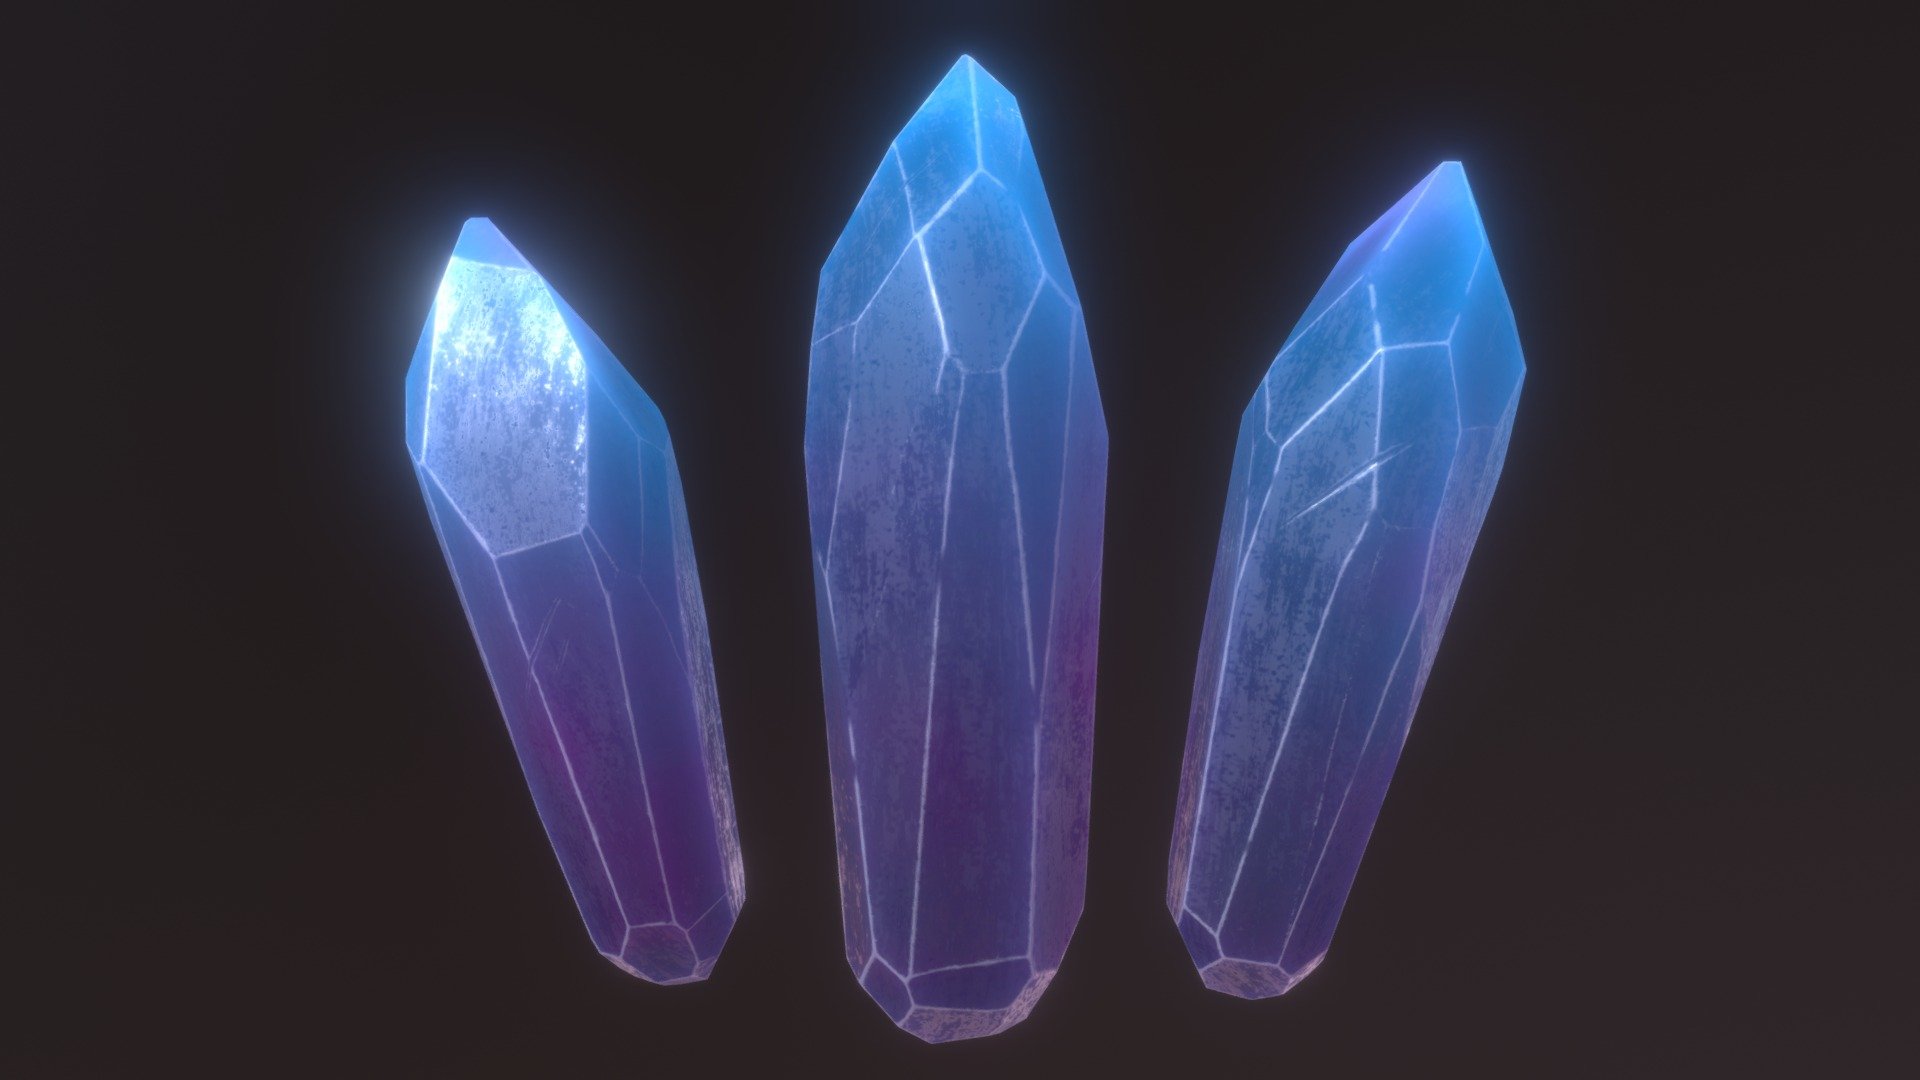 Made by tutorial: https://www.youtube.com/watch?v=k-vhw9J7AyI&amp;ab_channel=3DBOXACADEMY - Glowing Crystals - Download Free 3D model by ked182 3d model